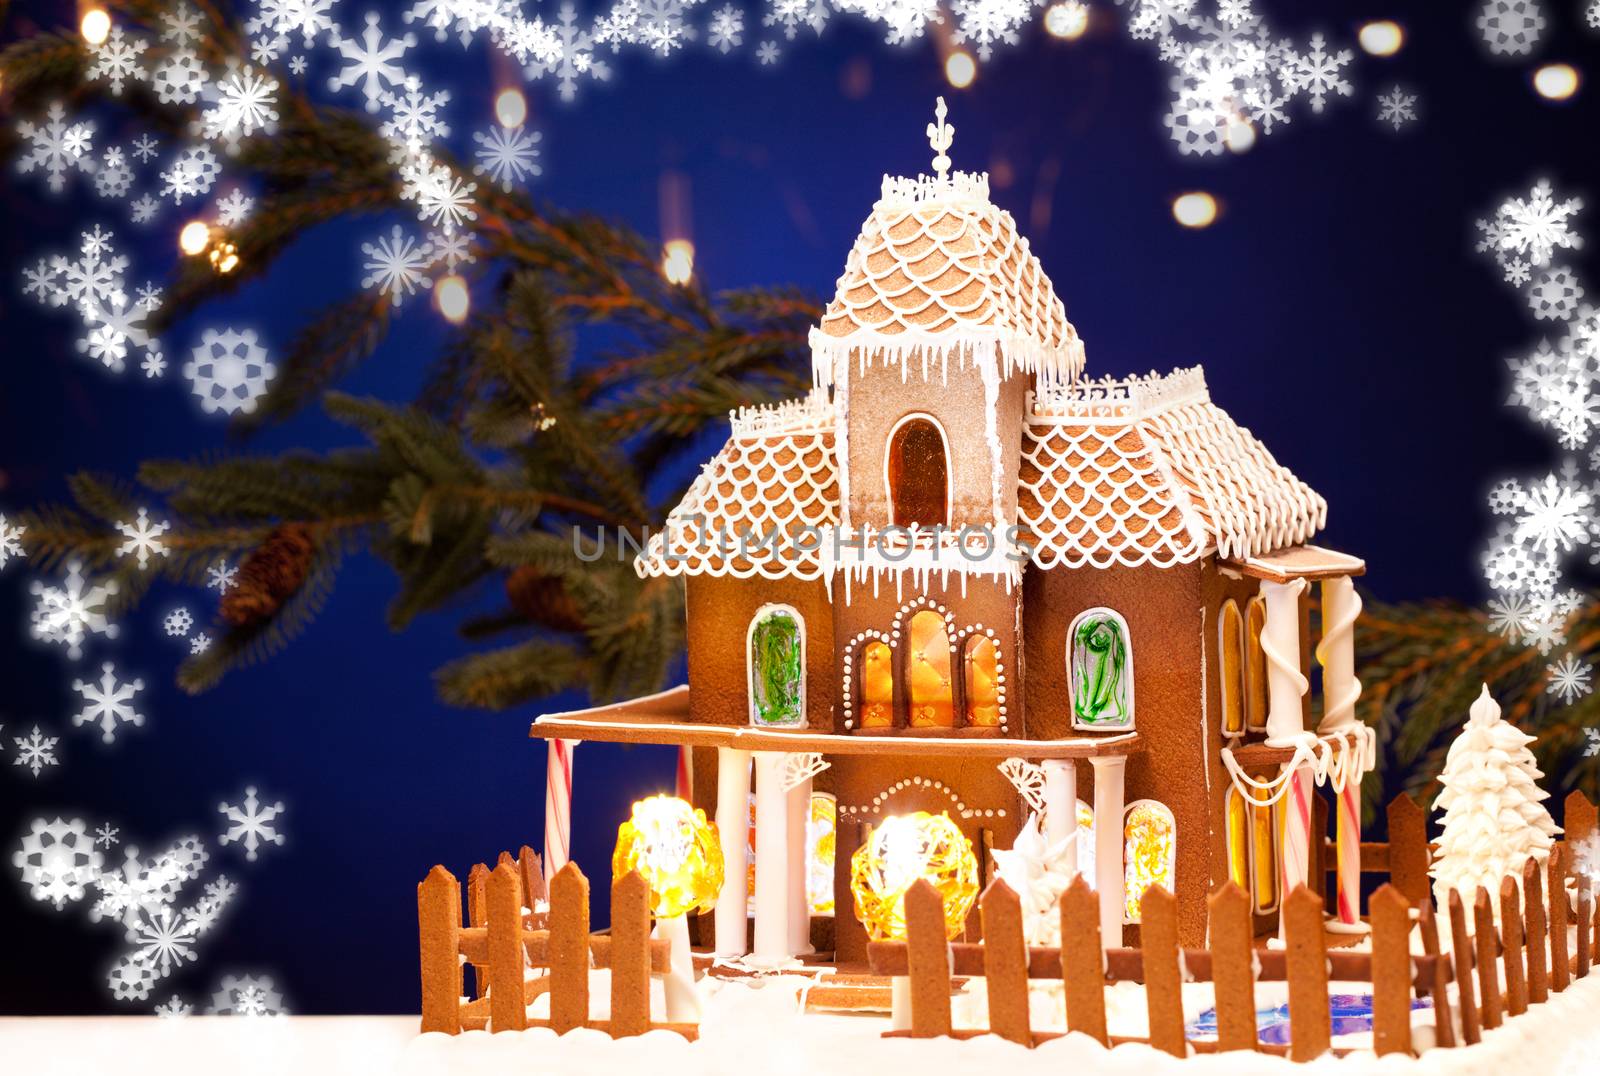 gingerbread house over christmas background by dolgachov